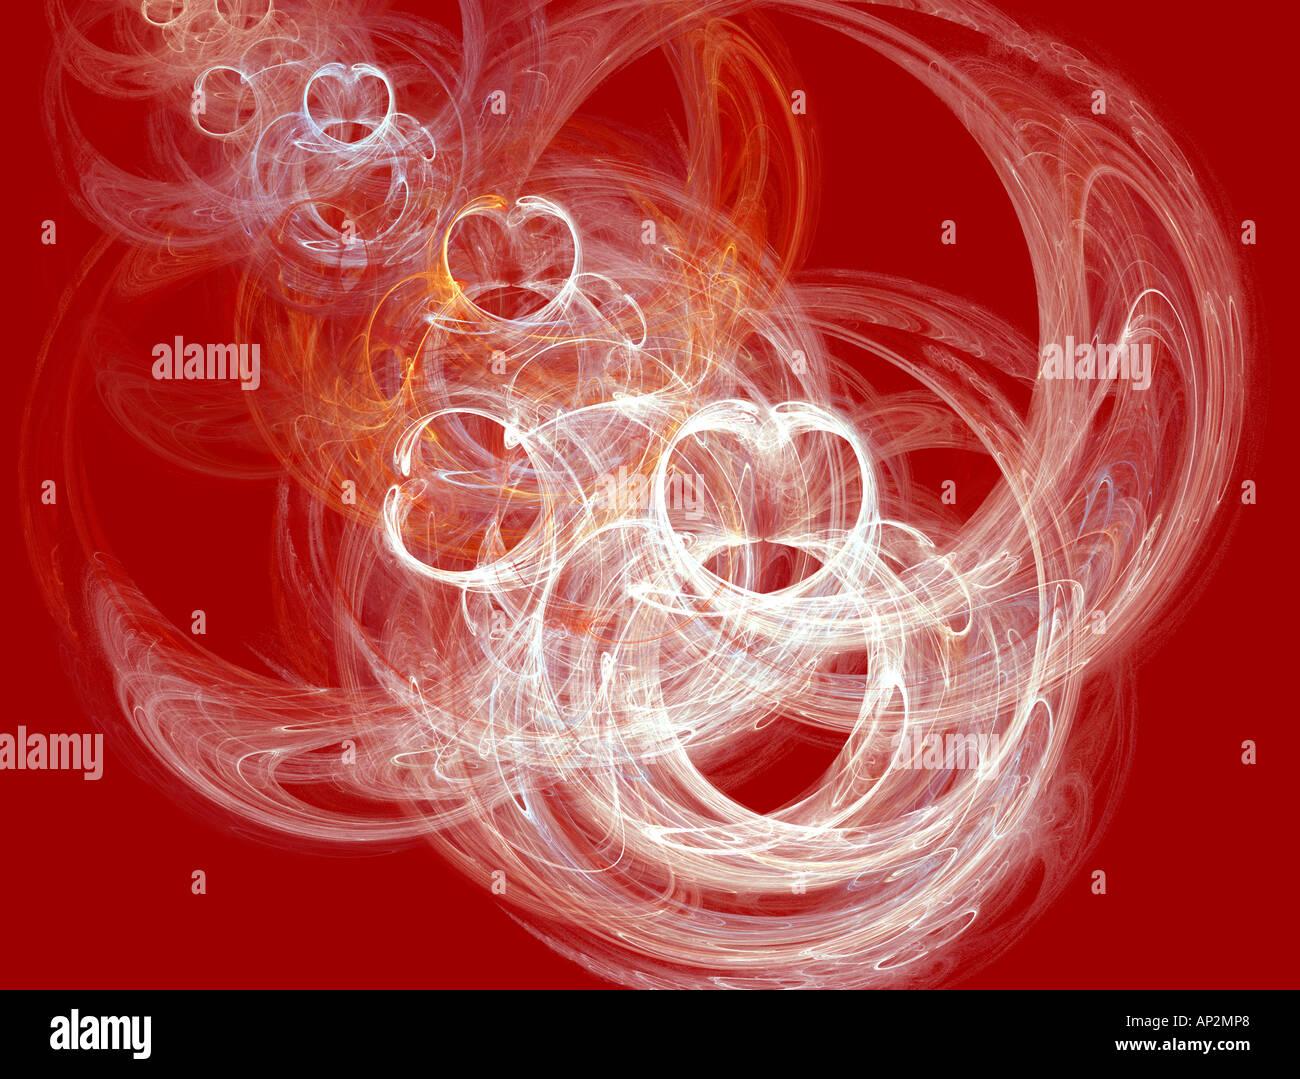 Coeurs abstract Fractal Banque D'Images